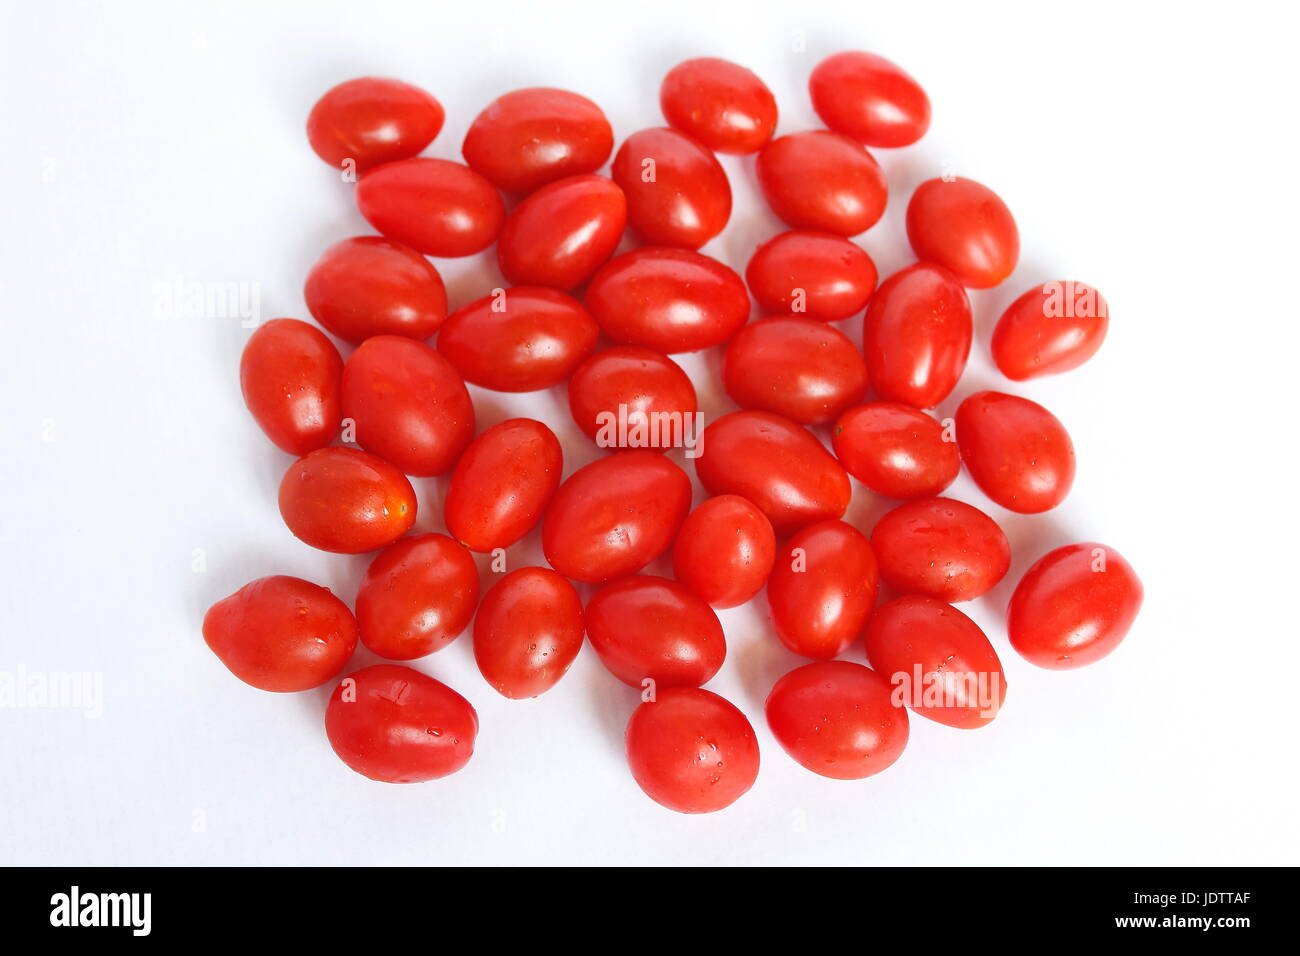 Small cherry tomatoes long red and fresh in group on white background Stock Photo